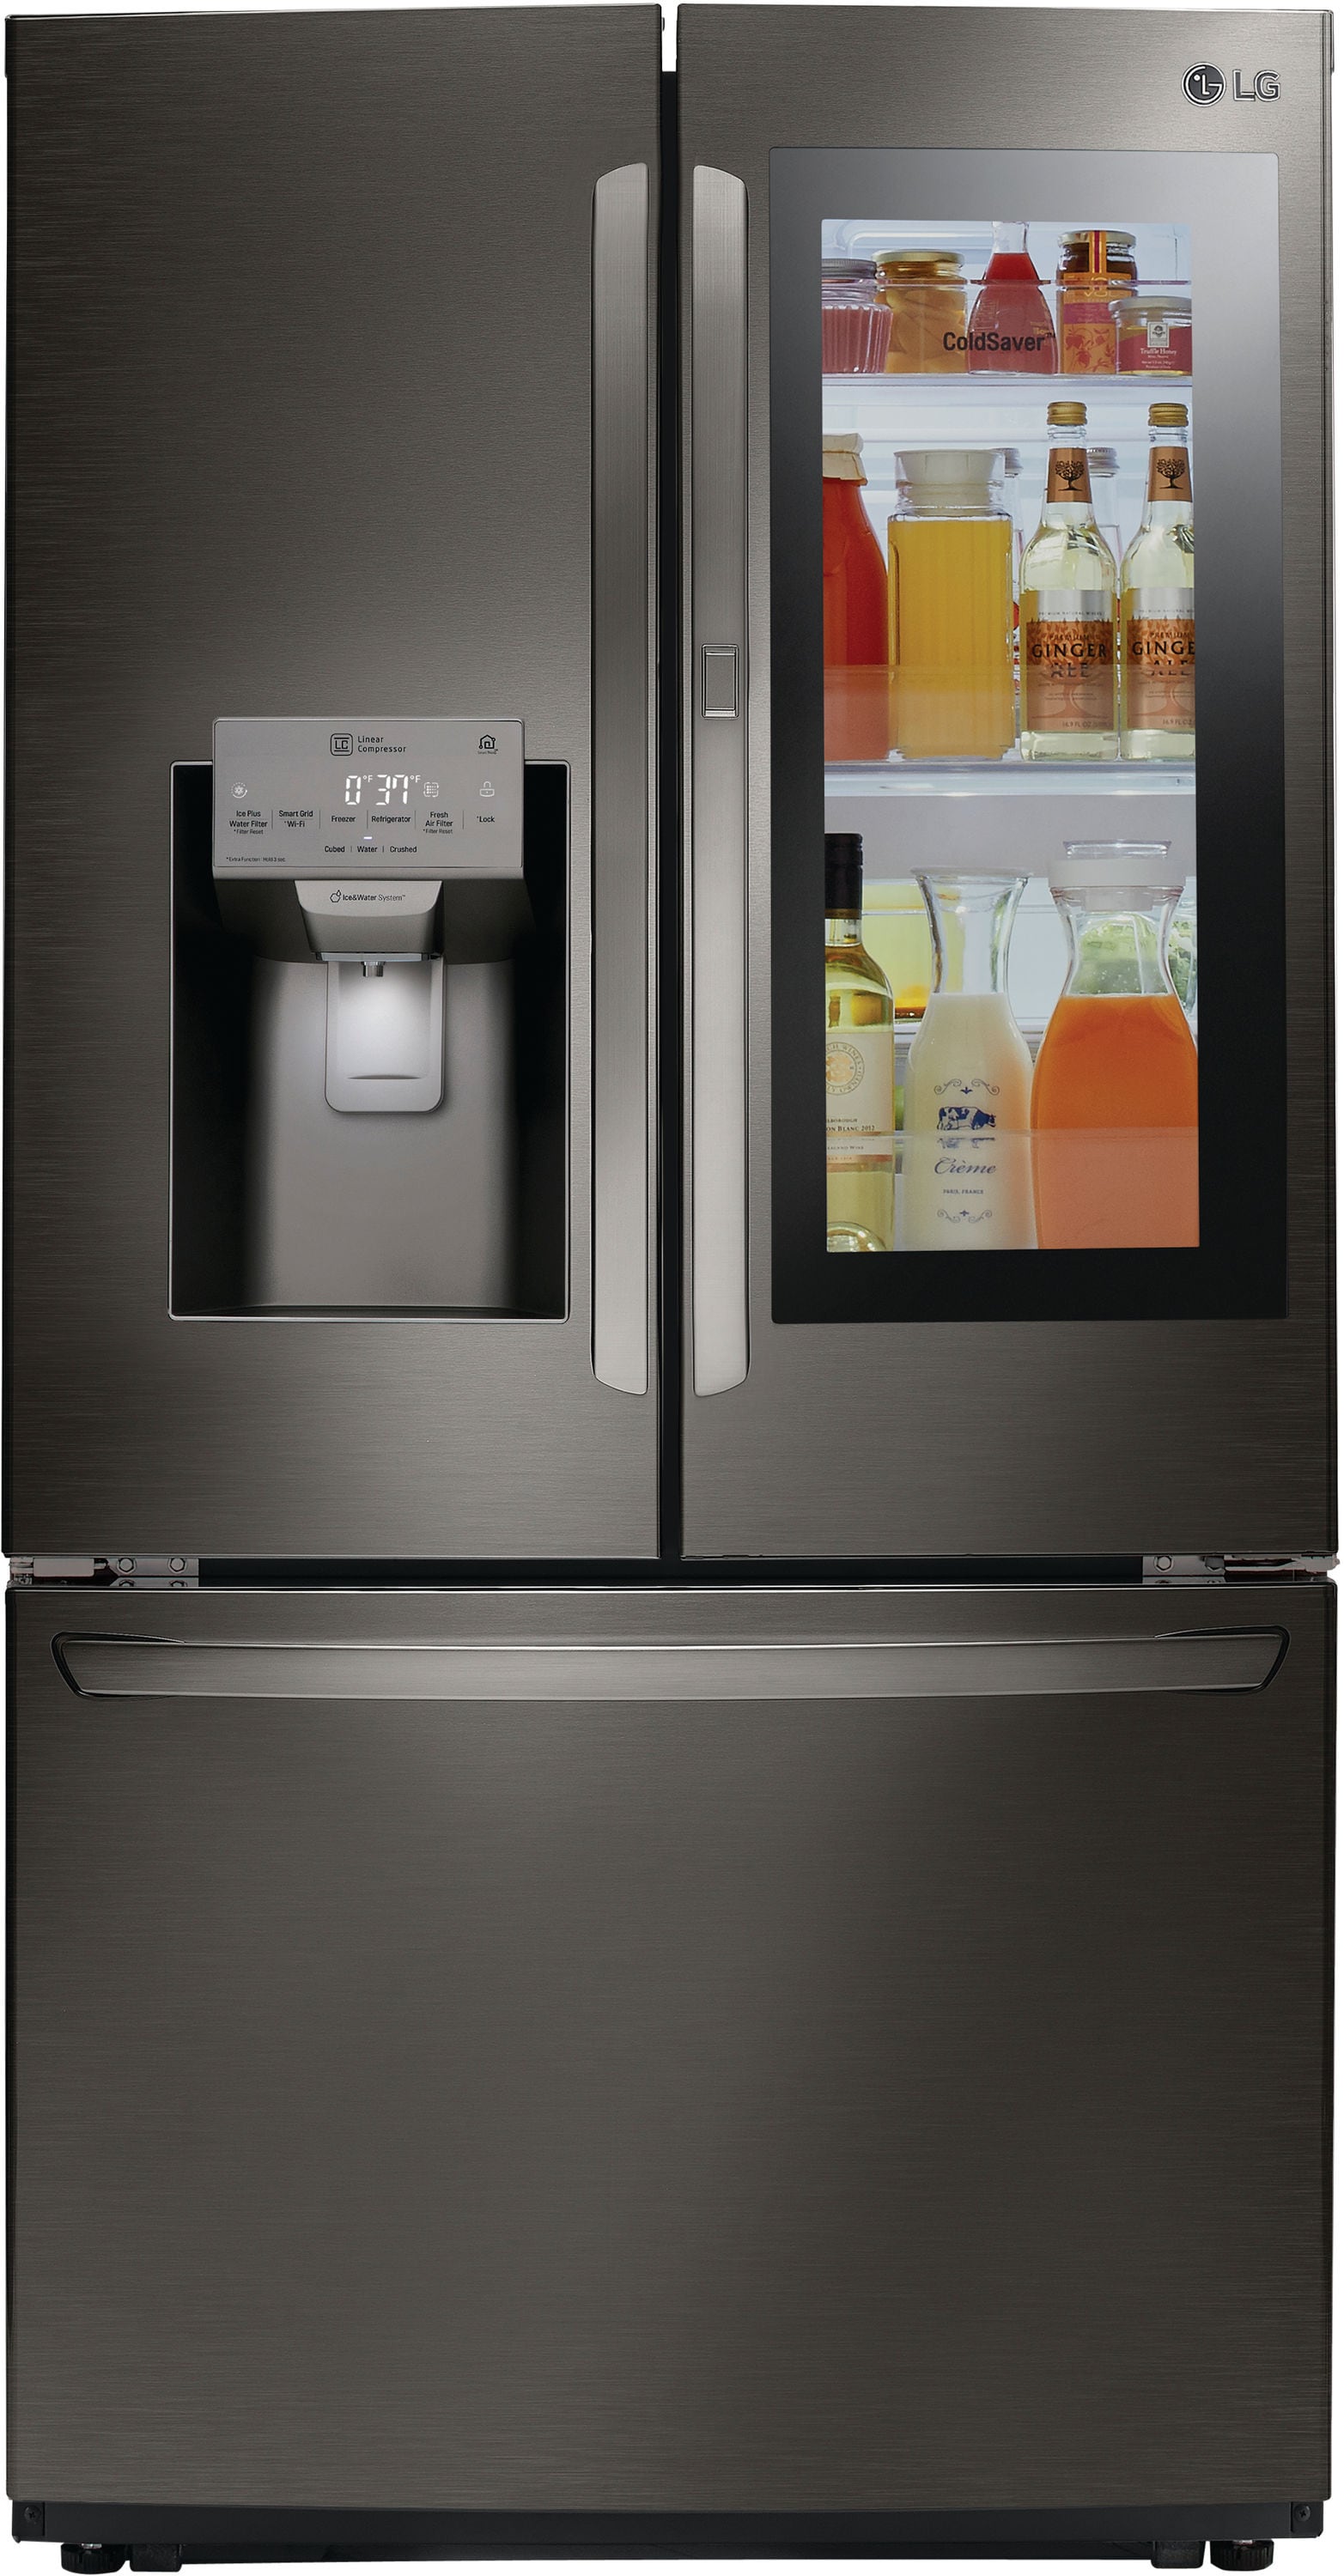 LG Black stainless steel French Door Refrigerators at Lowes.com Lowes Lg Black Stainless Steel Refrigerator